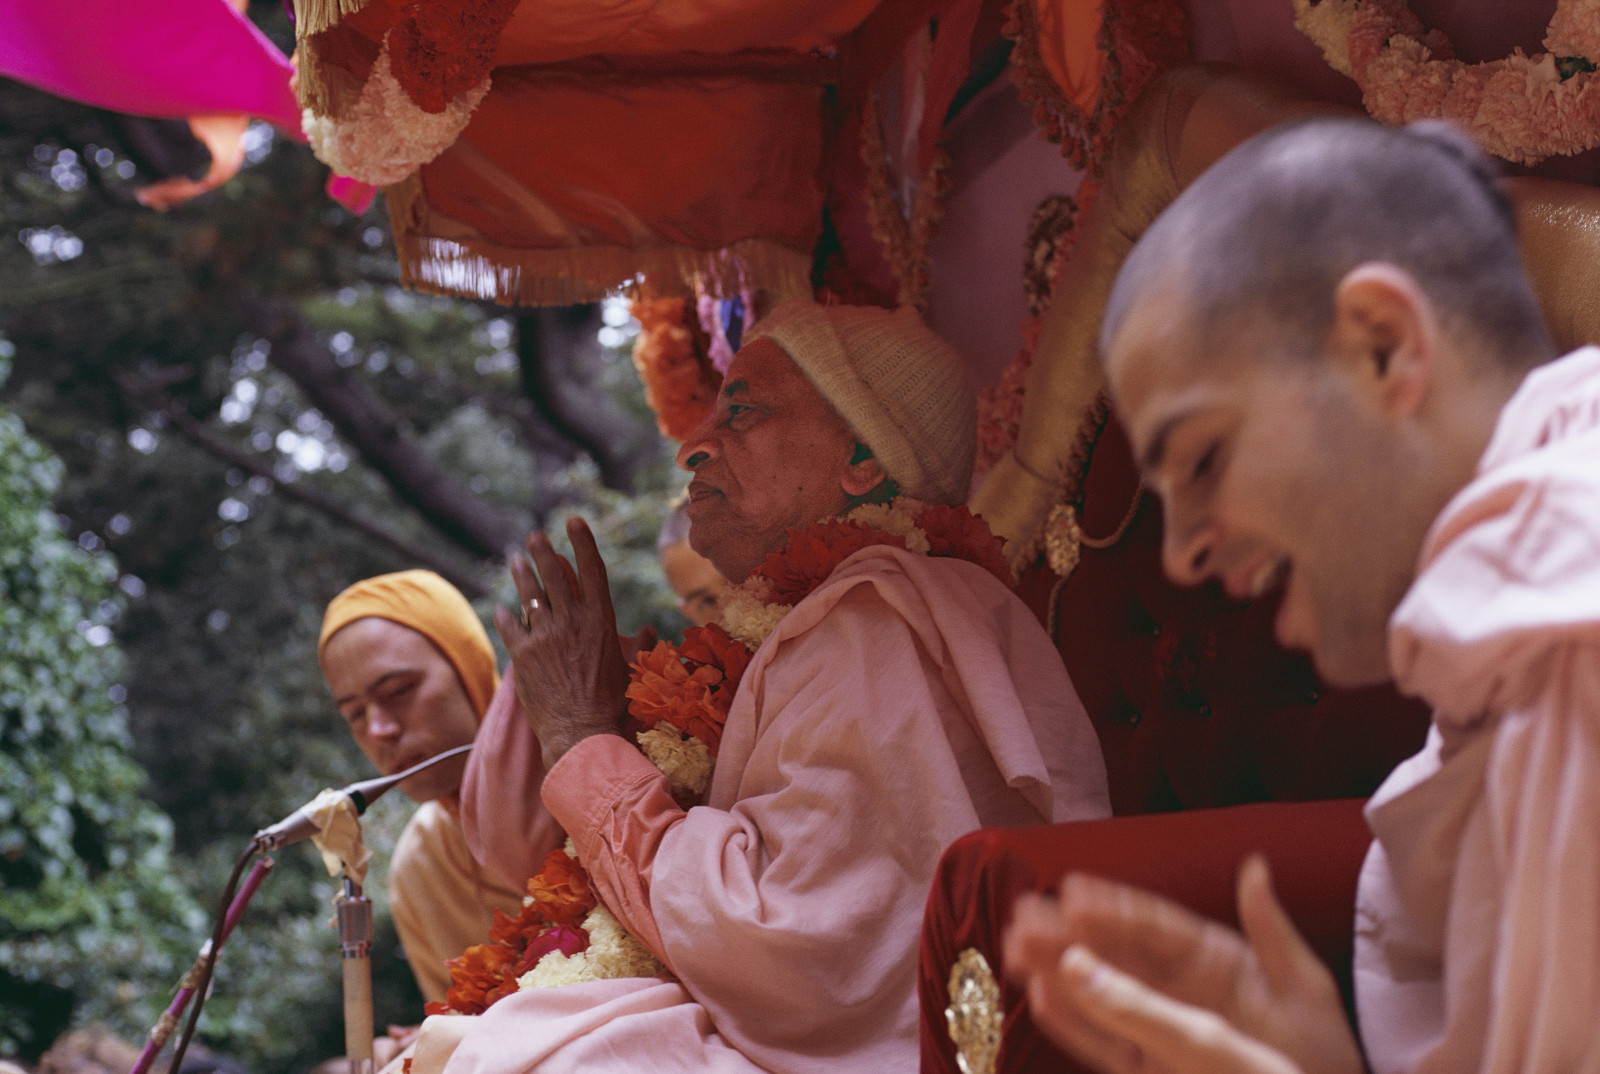 What Happened to the Hare Krishna's?